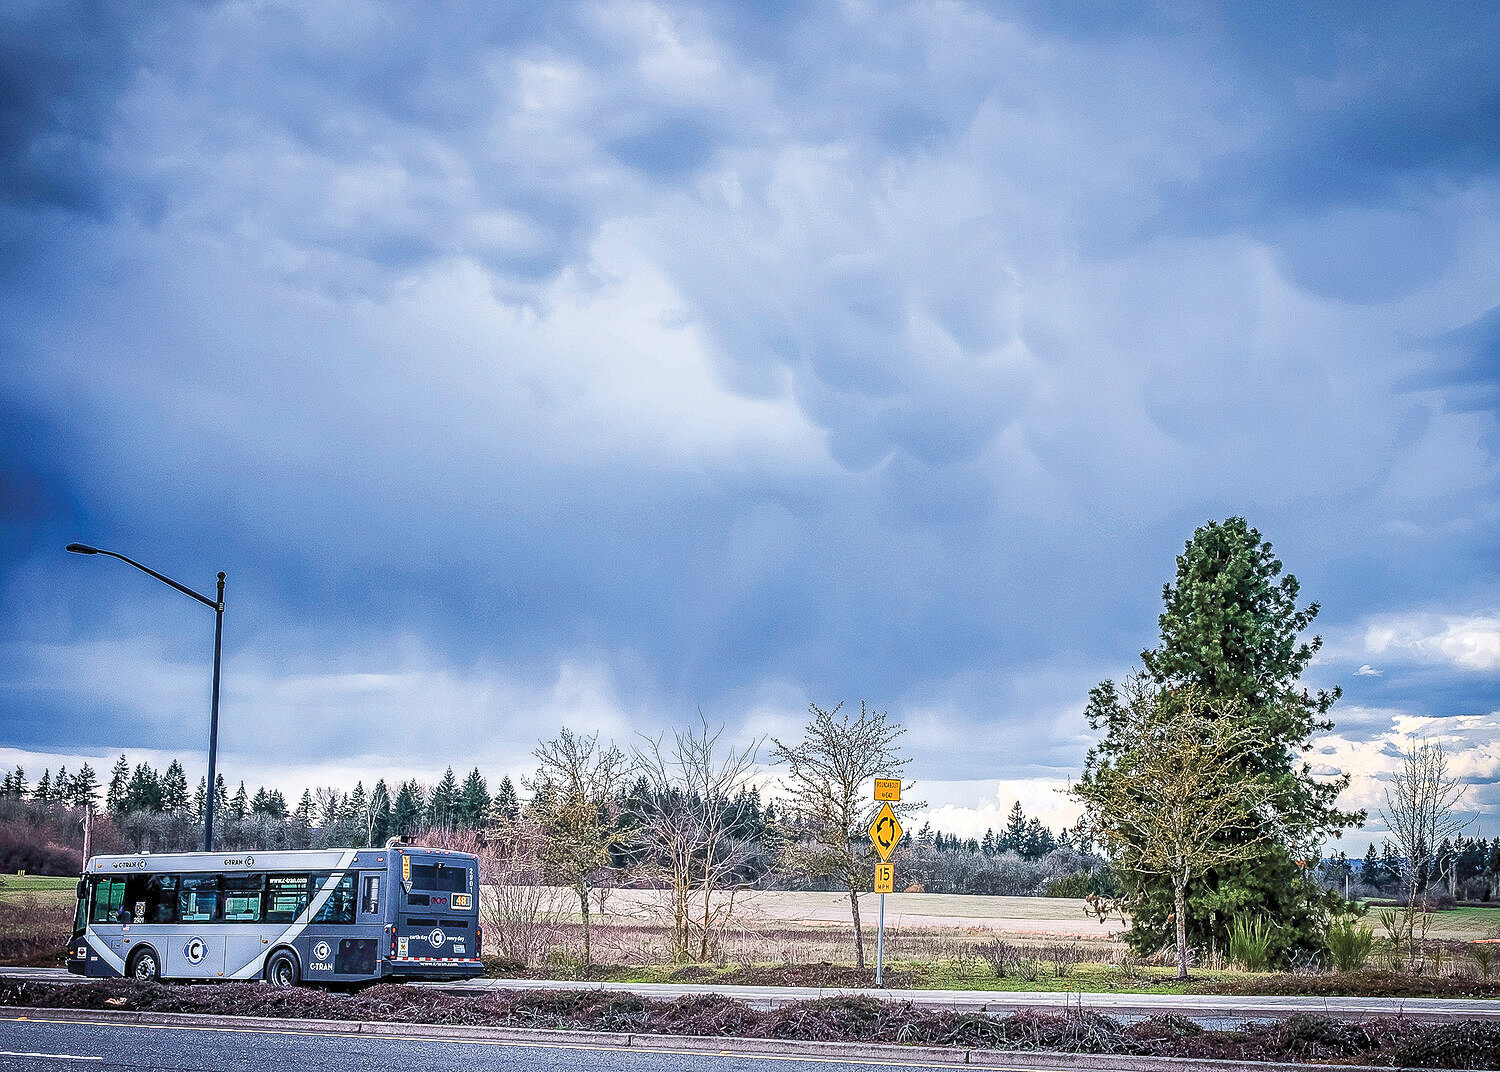 A severe thunderstorm on the evening of Wednesday, March 22 forms over Ridgefield. Rainbands and a small pocket of mammatus clouds formed as cold air began to sink down toward the ground, which created the pouch-like shapes  near the Pioneer Street overpass. .